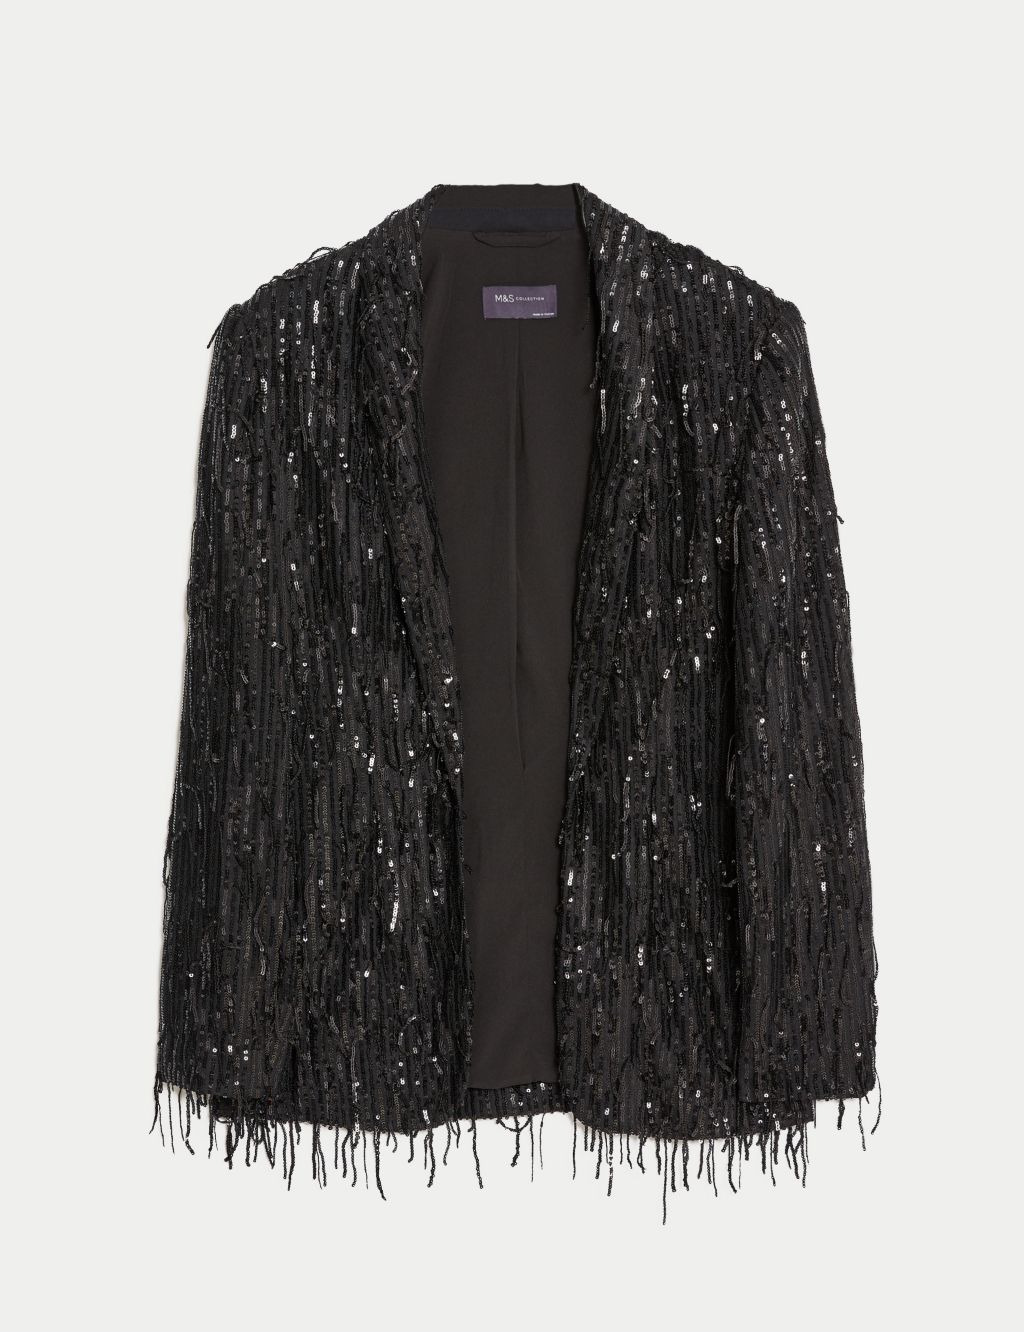 Relaxed Sequin Single Breasted Blazer image 2